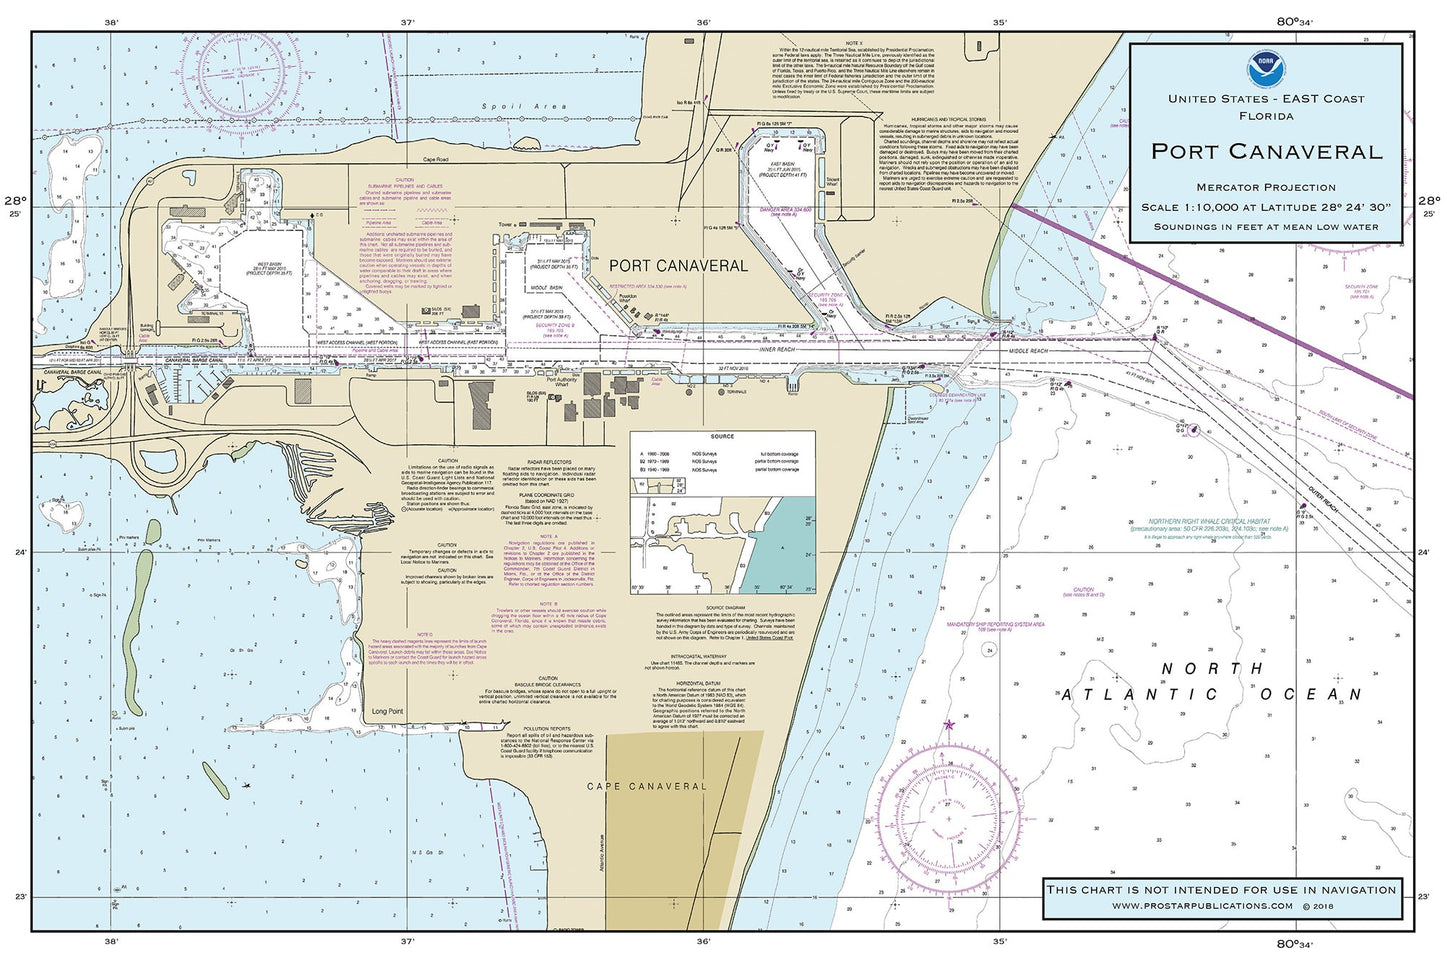 Nautical Placemat: Port Canaveral (FL)